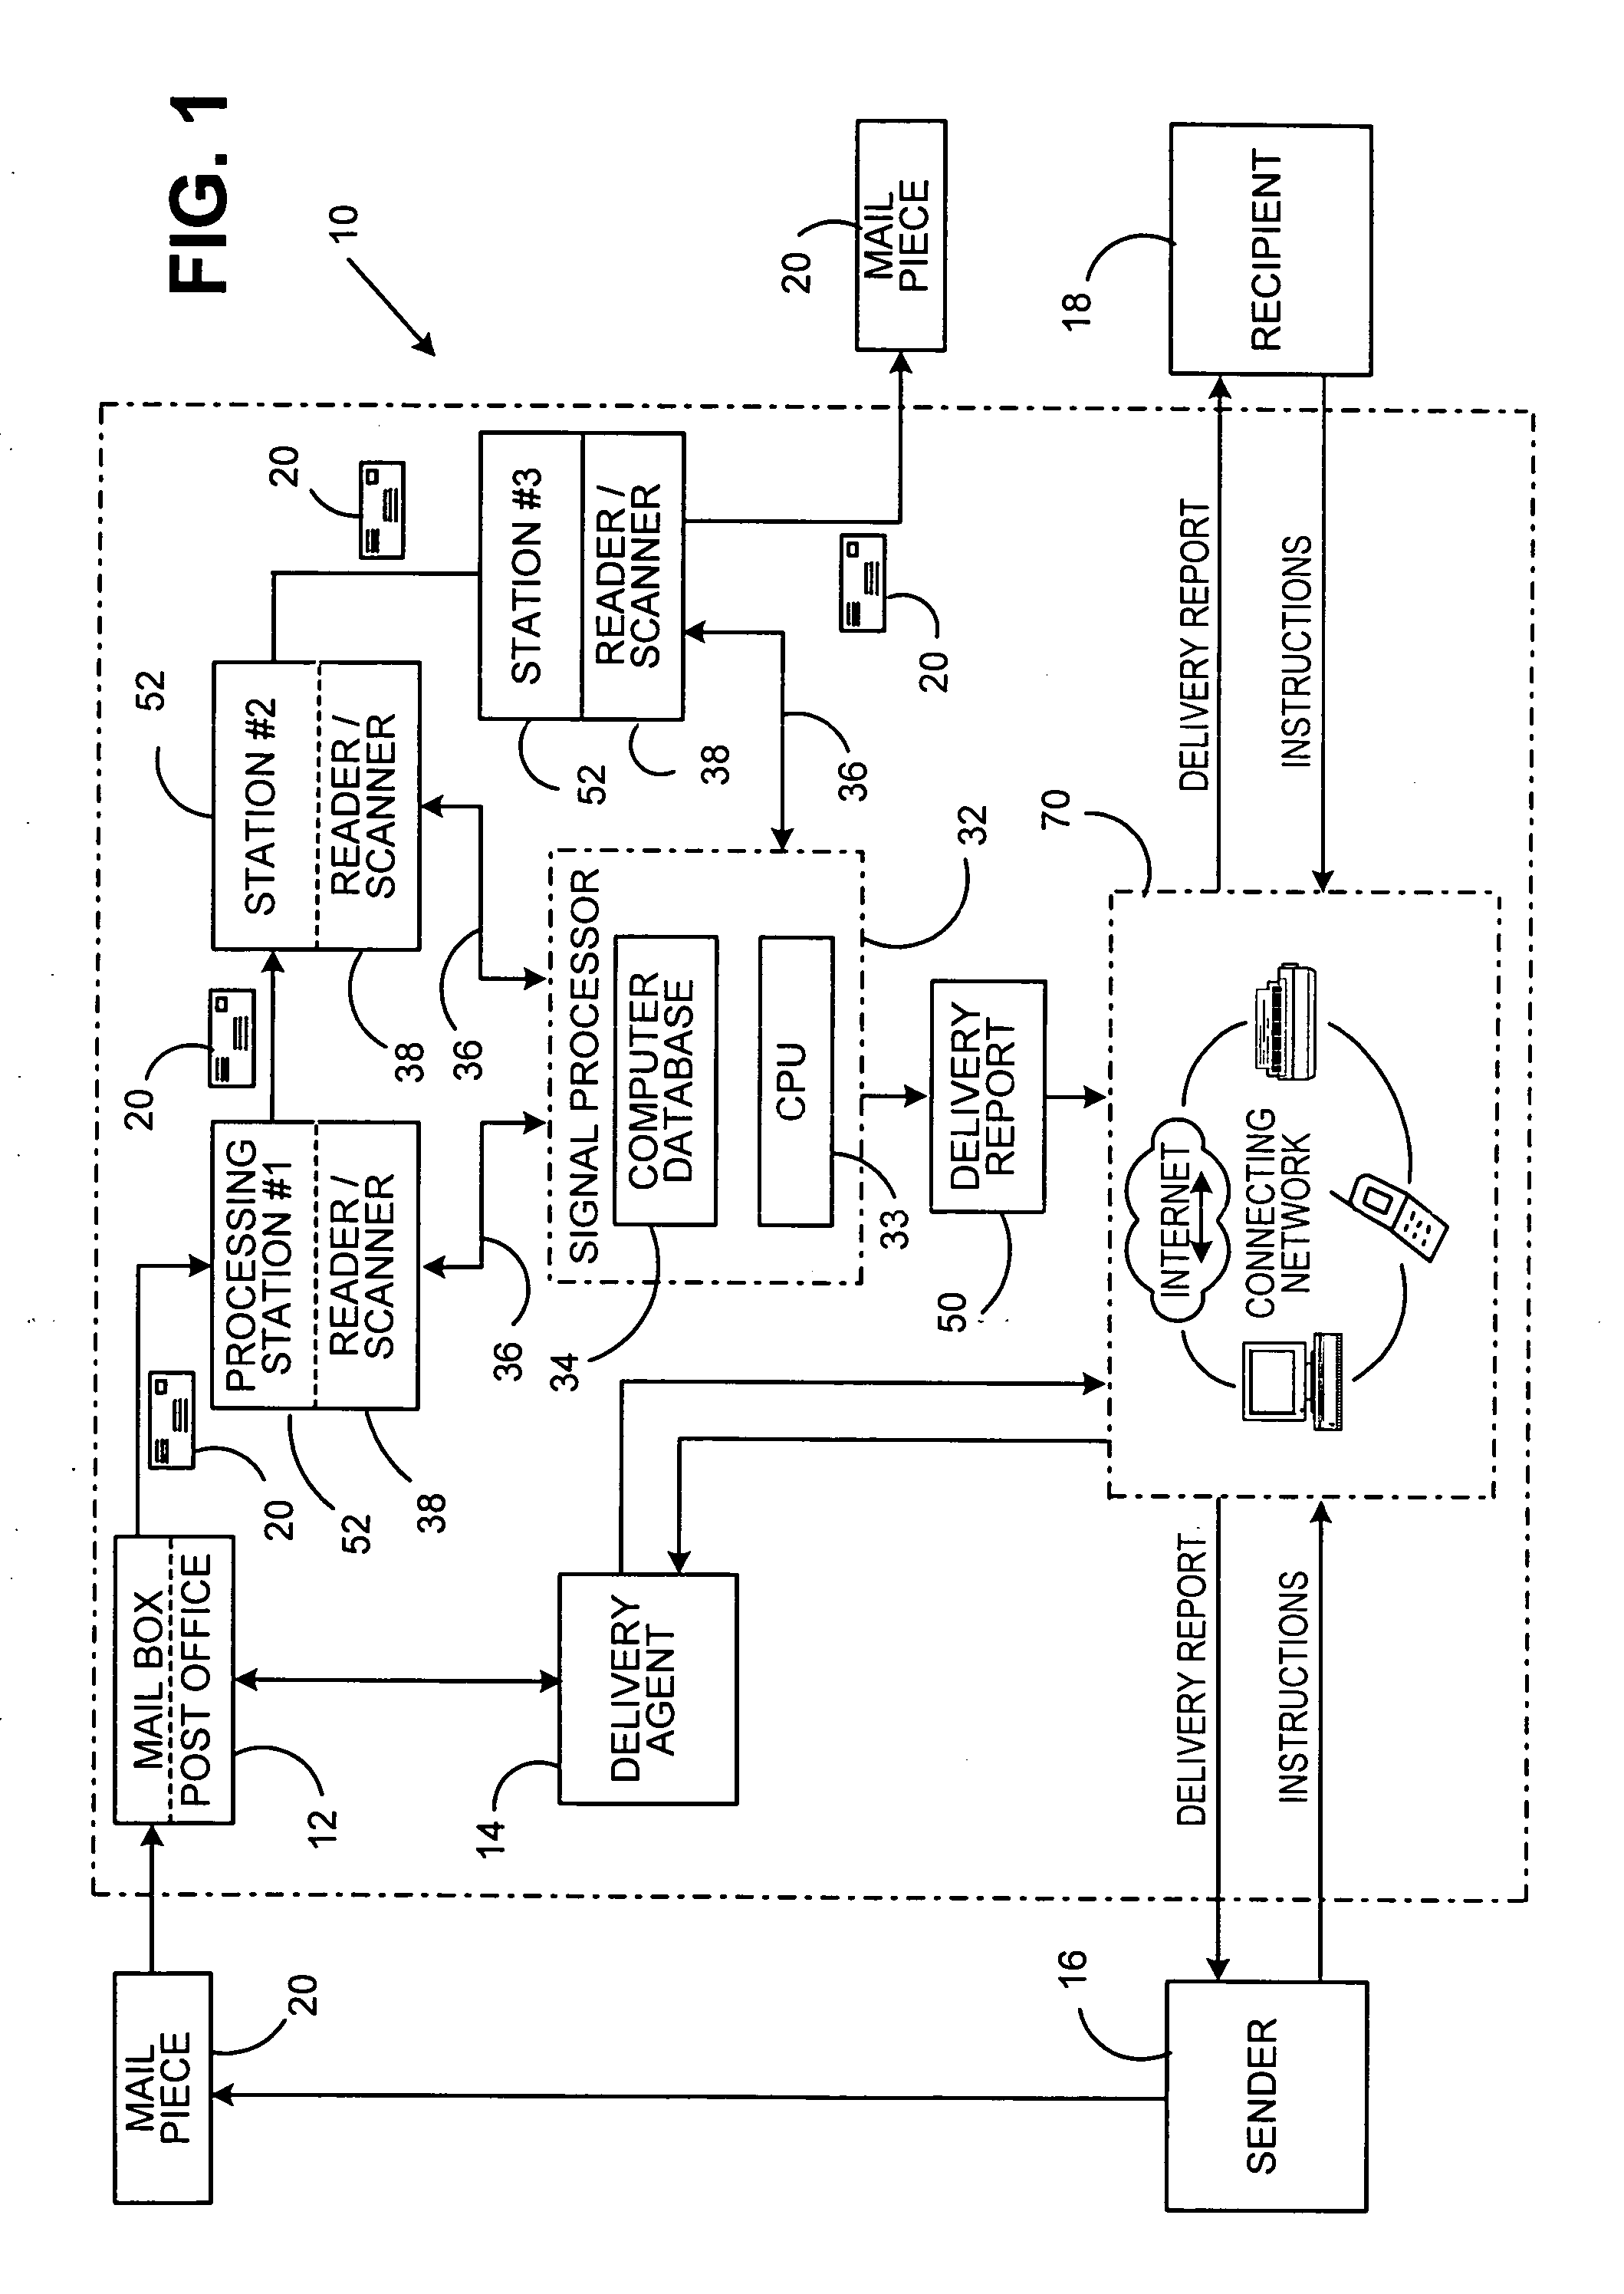 Method and system for communicating delivery information in a mail distribution system